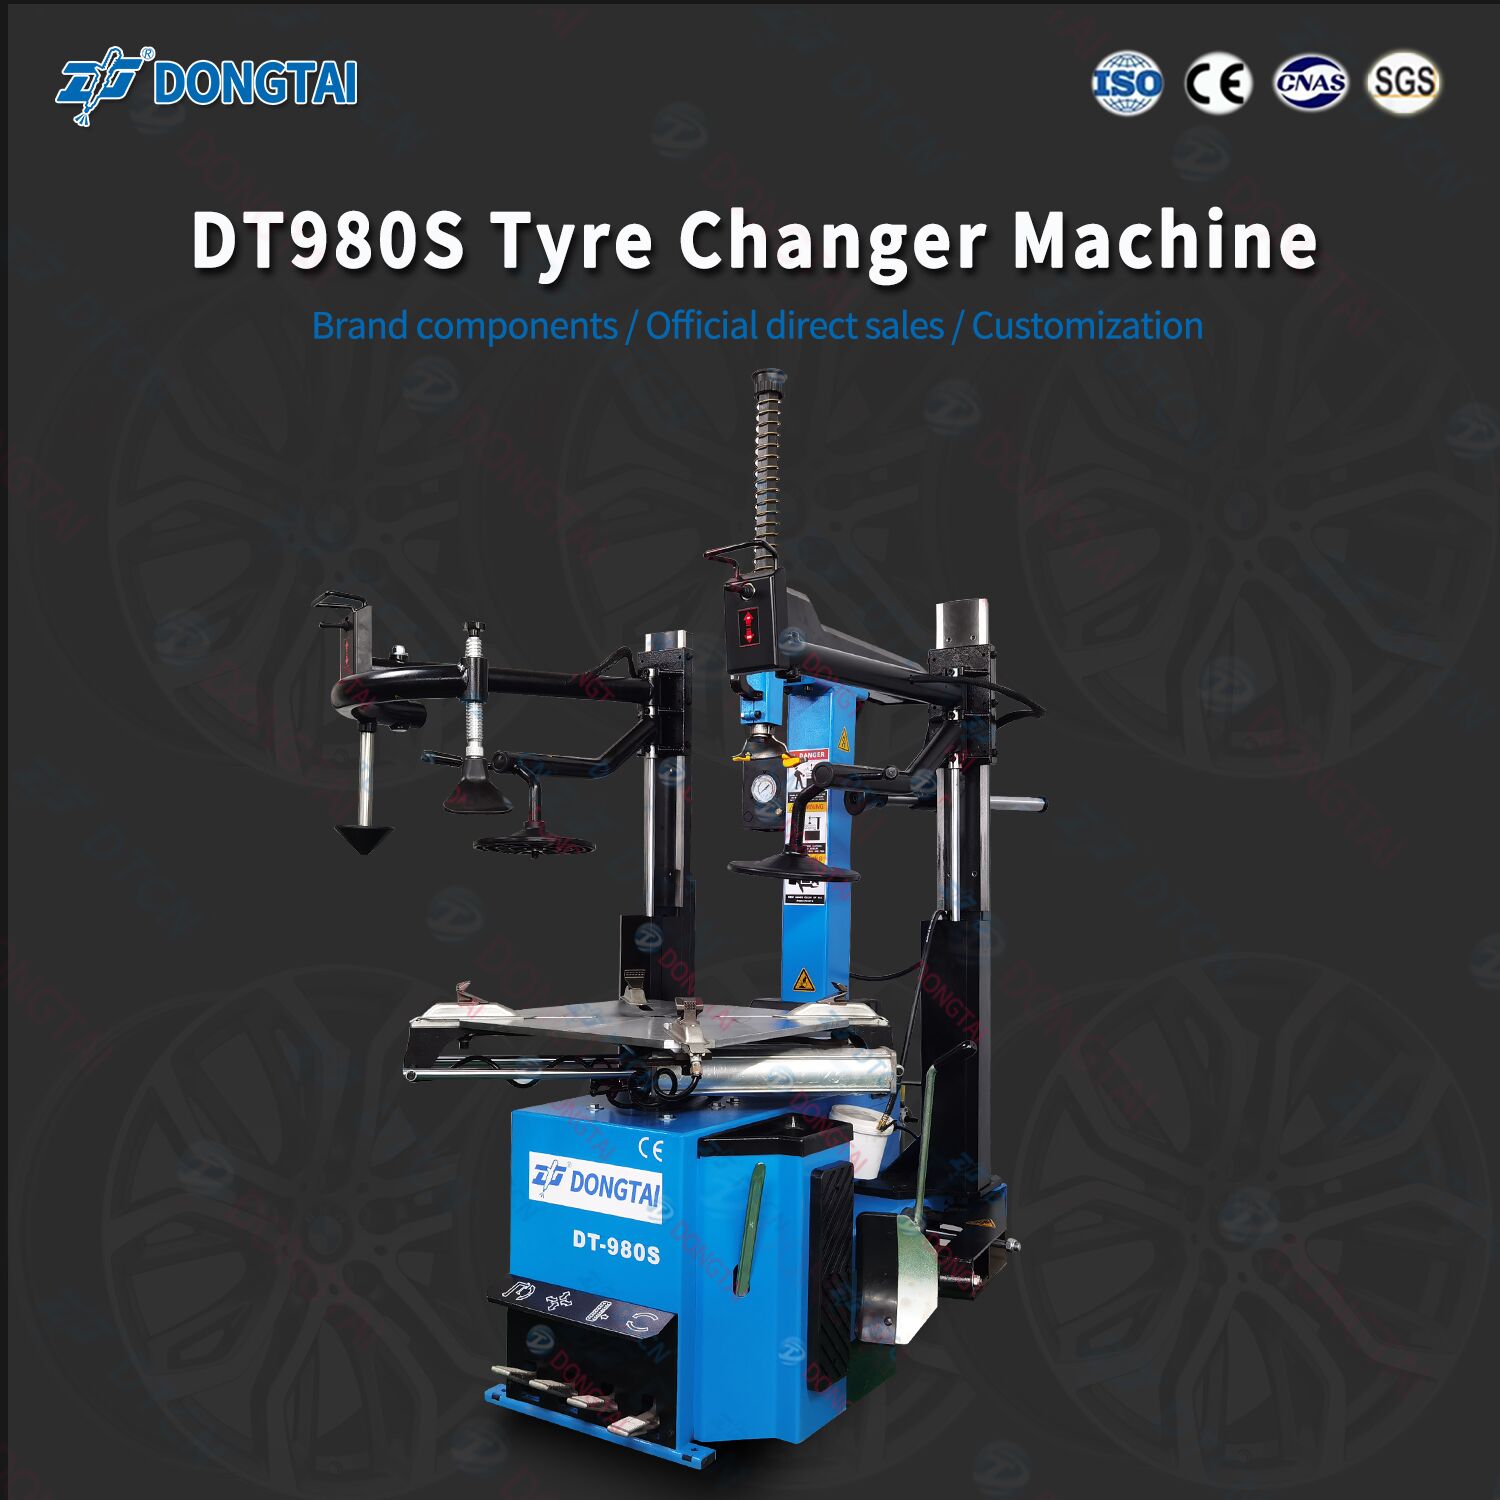 DT980S Tyre Changer Machine Featured Image